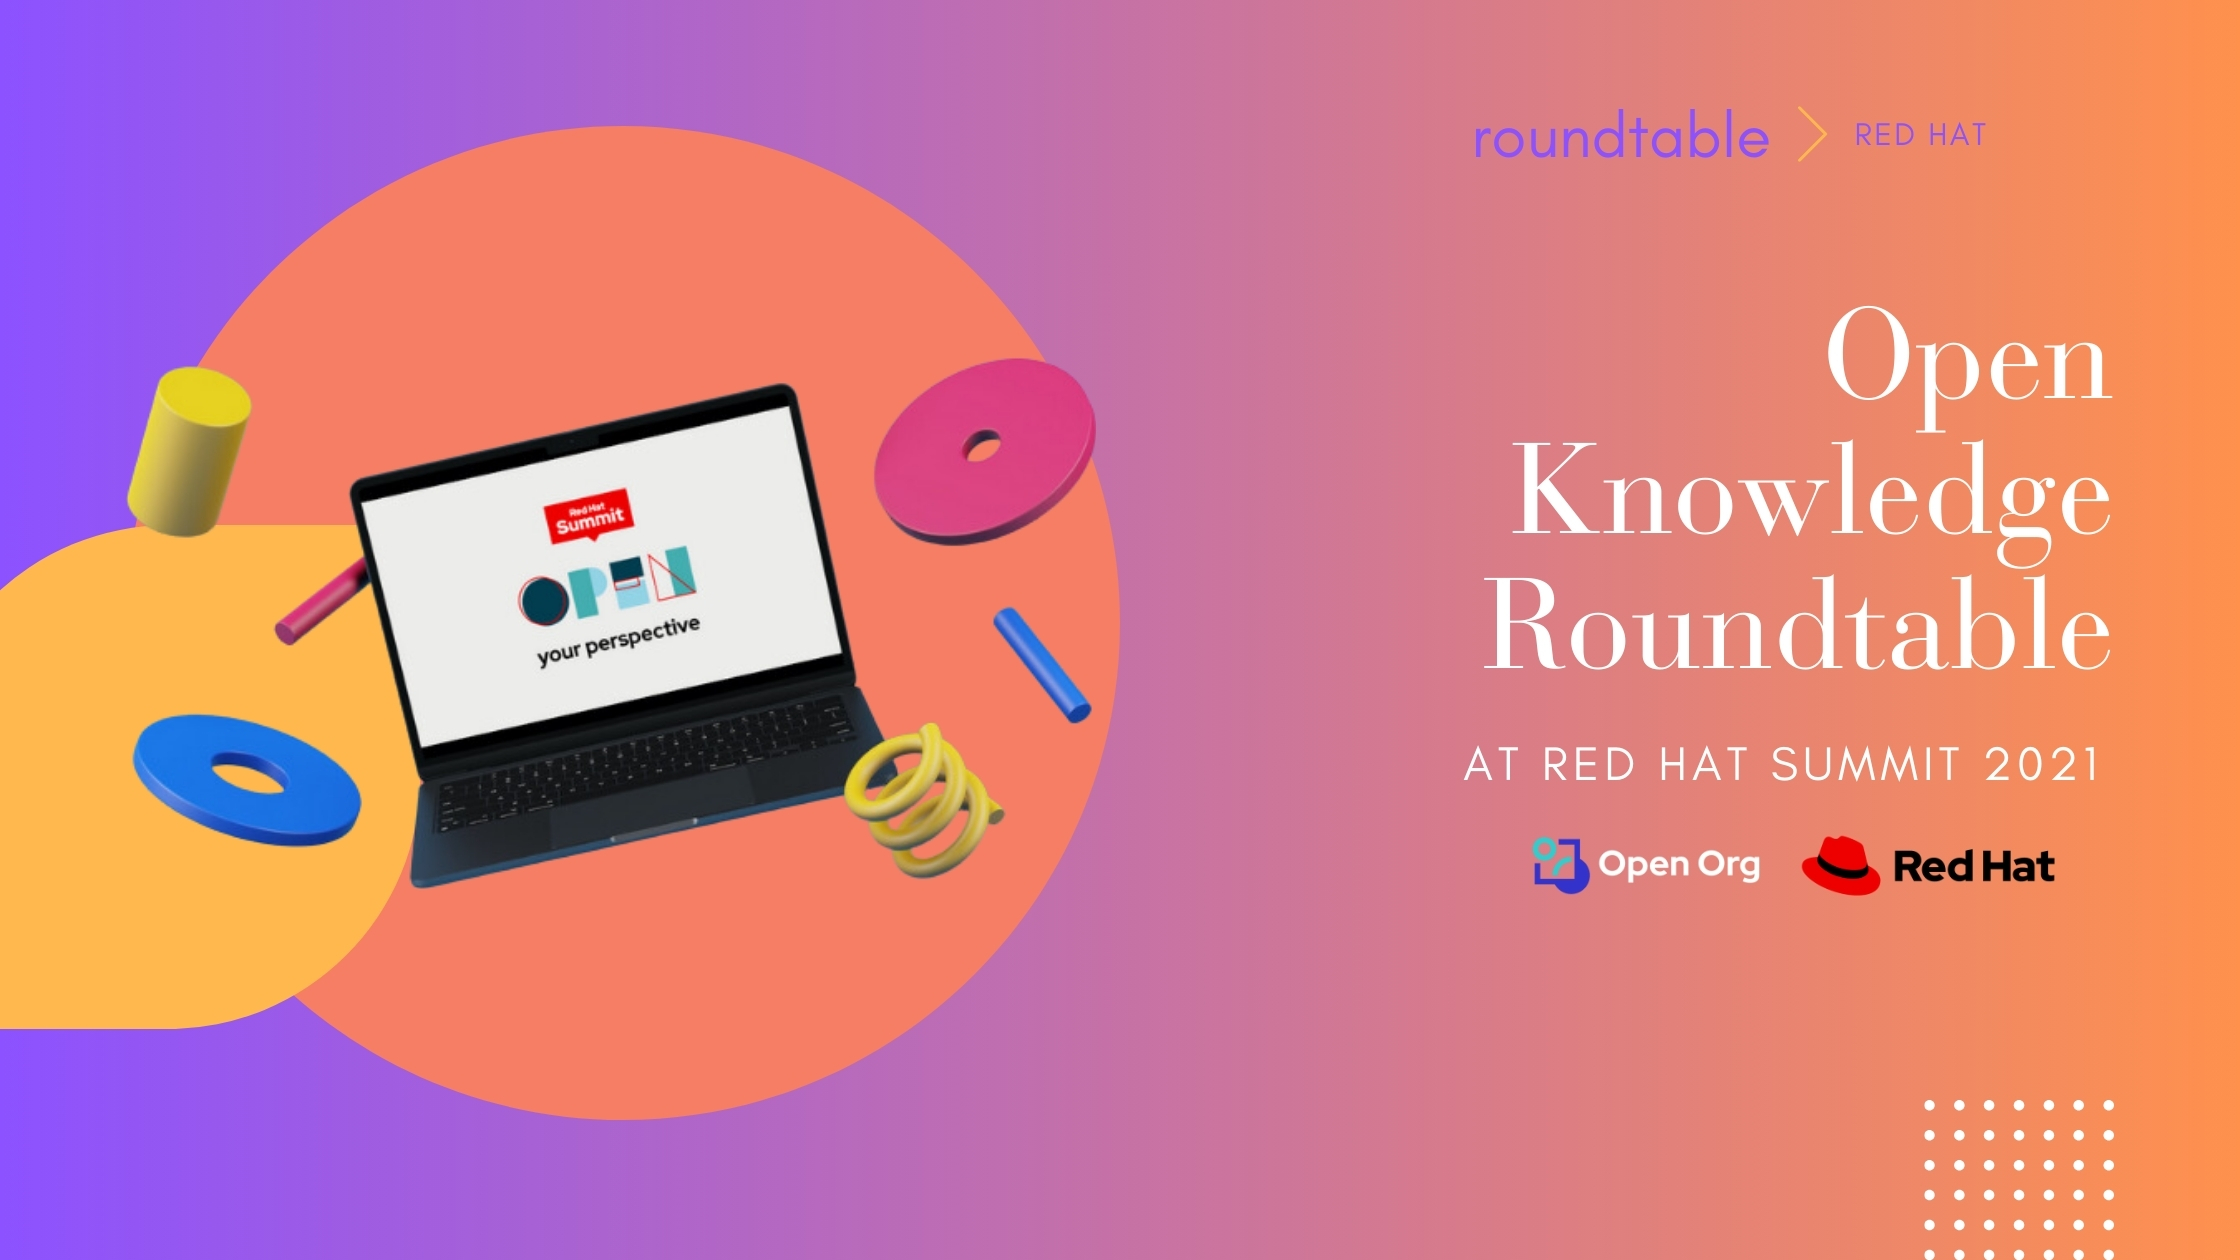 Open Knowledge Roundtable at Red Hat Summit 2021